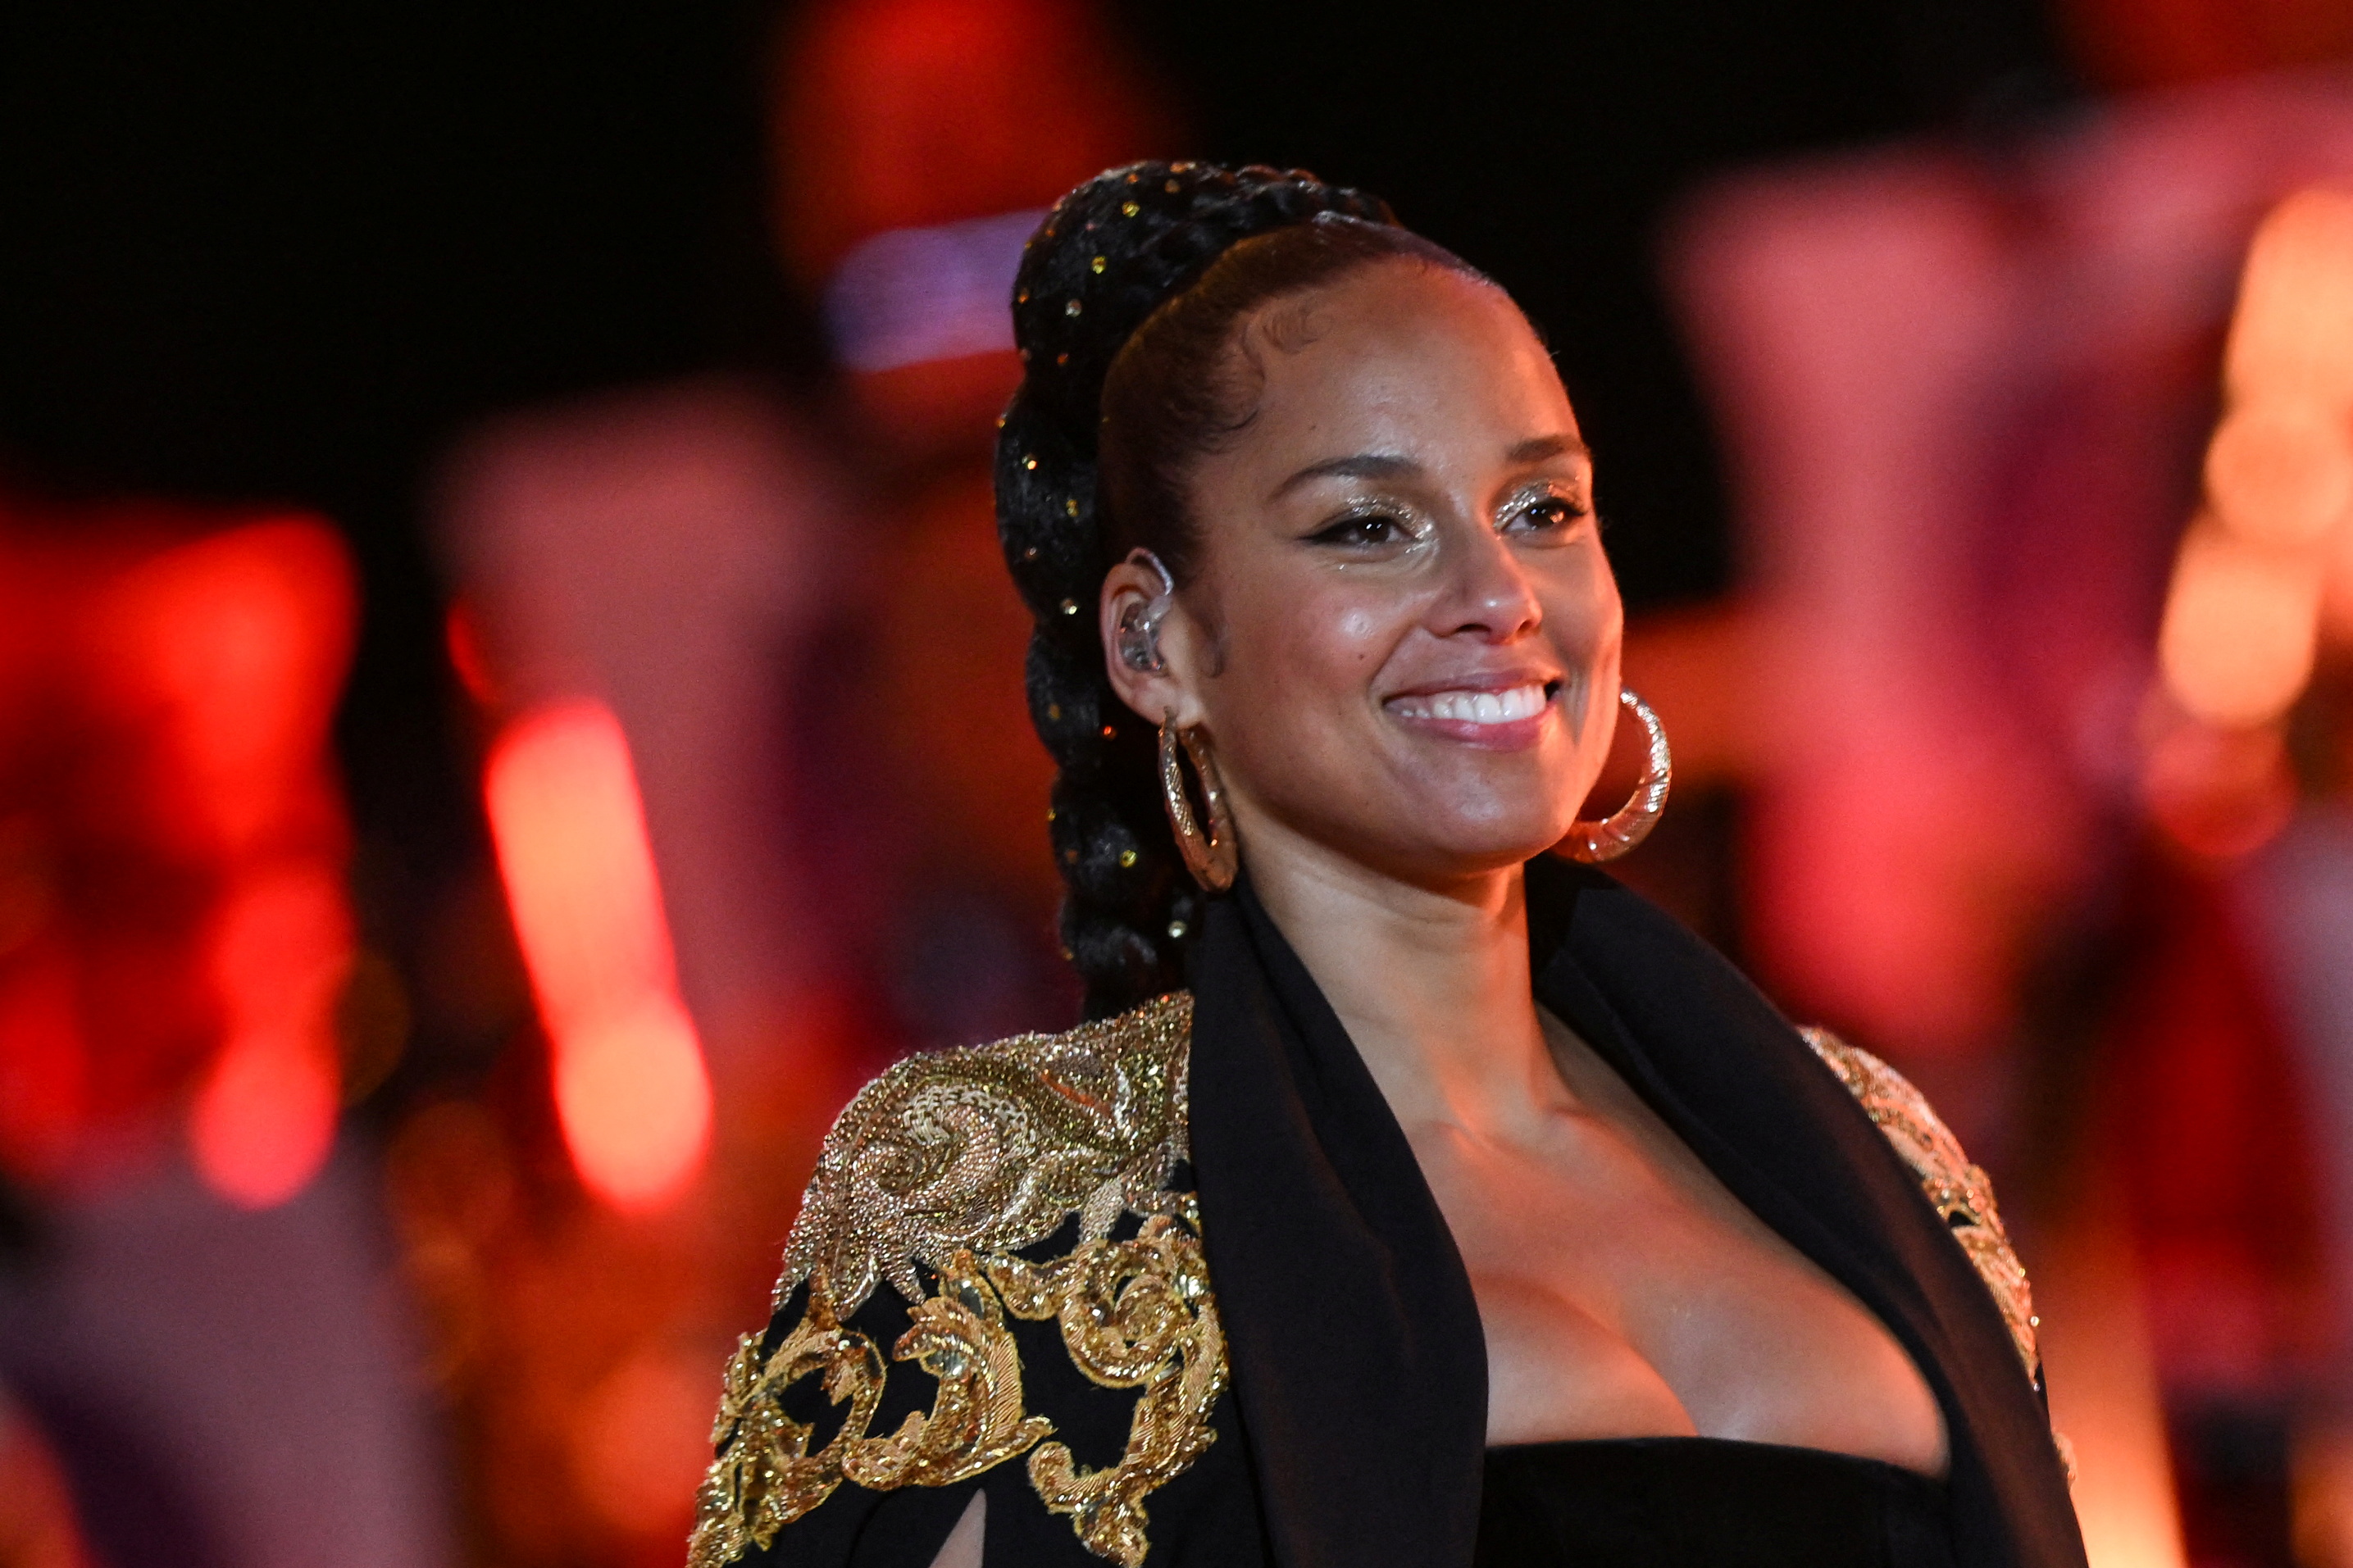 US singer and pianist Alicia Keys arrives to perform during the Platinum Party at Buckingham Palace on June 4, 2022 as part of Queen Elizabeth II's platinum jubilee celebrations. - Some 22,000 people and millions more at home are expected at a star-studded musical celebration for Queen Elizabeth II's historic Platinum Jubilee. Daniel LEAL/Pool via REUTERS